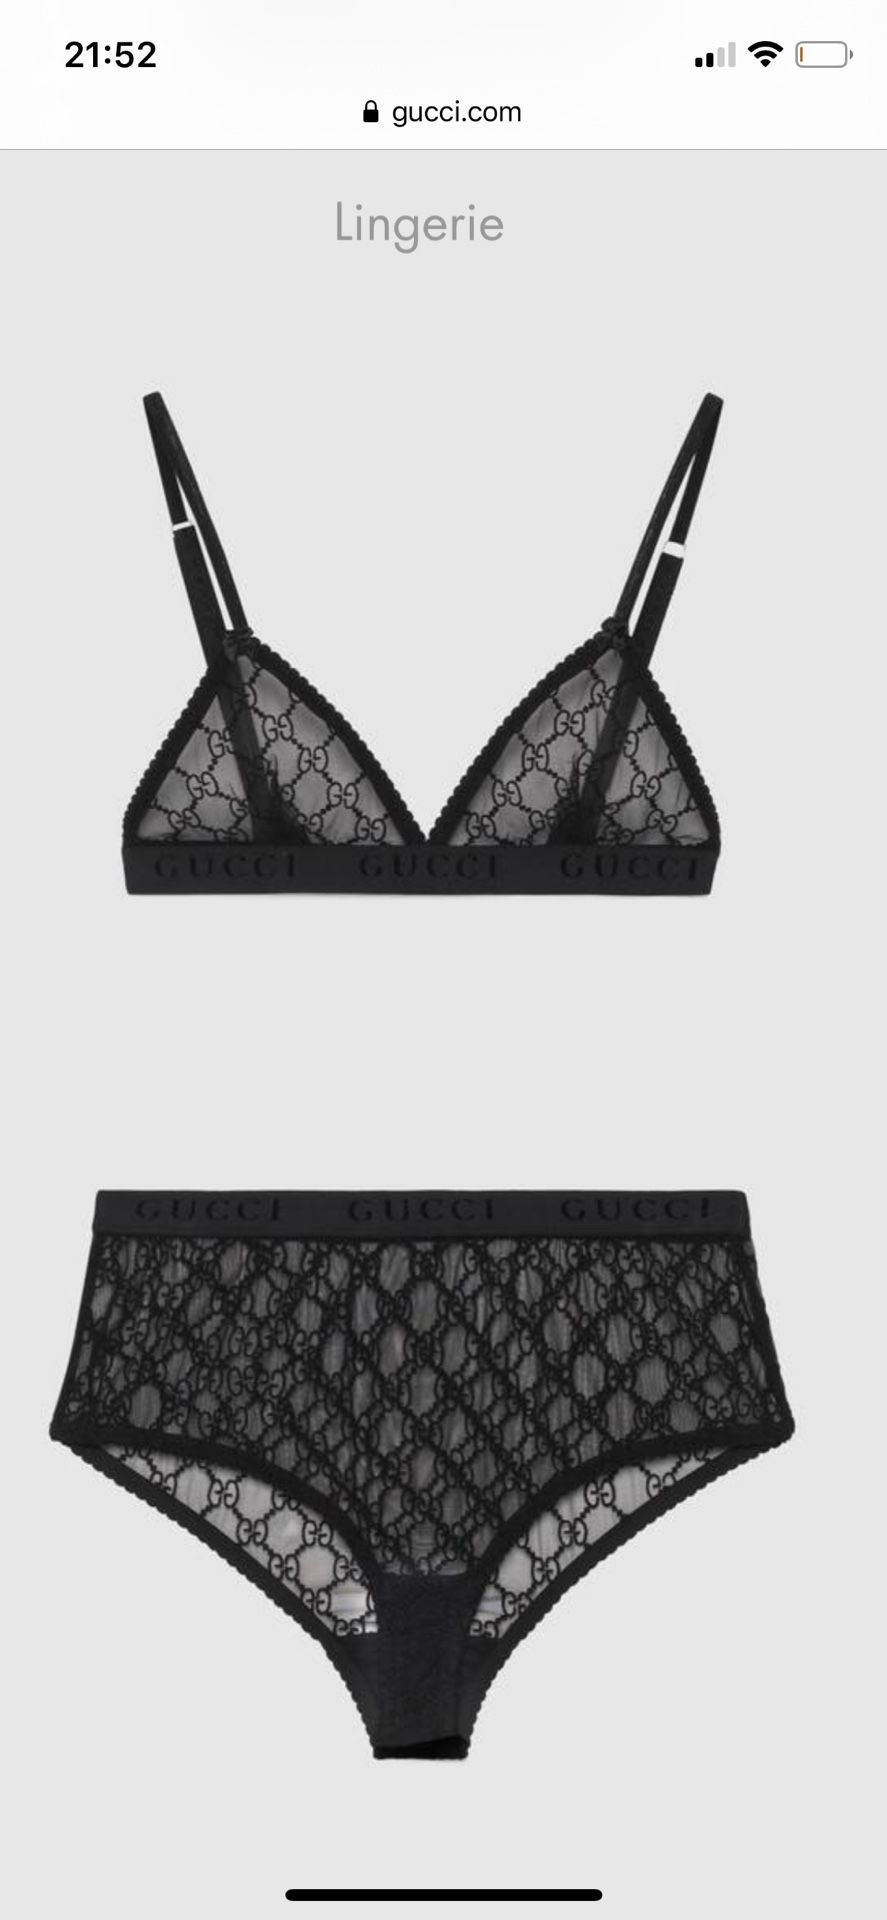 Brand new Gucci bra and panty set LINGERIE